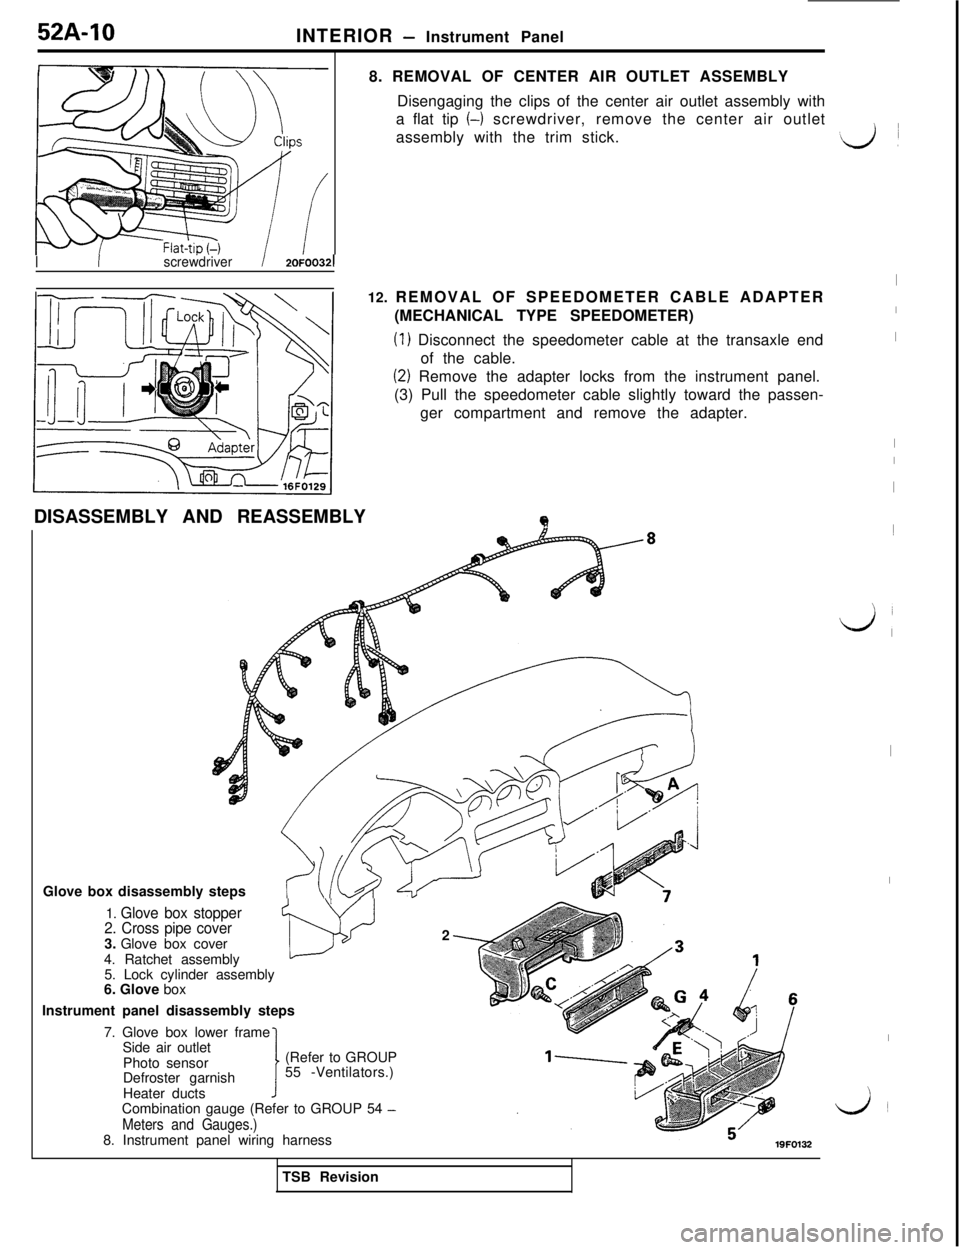 MITSUBISHI 3000GT 1991 Owners Manual 52A-10
INTERIOR - Instrument Panel
8. REMOVAL OF CENTER AIR OUTLET ASSEMBLY
Disengaging the clips of the center air outlet assembly with
a flat tip 
(-1 screwdriver, remove the center air outlet
assem